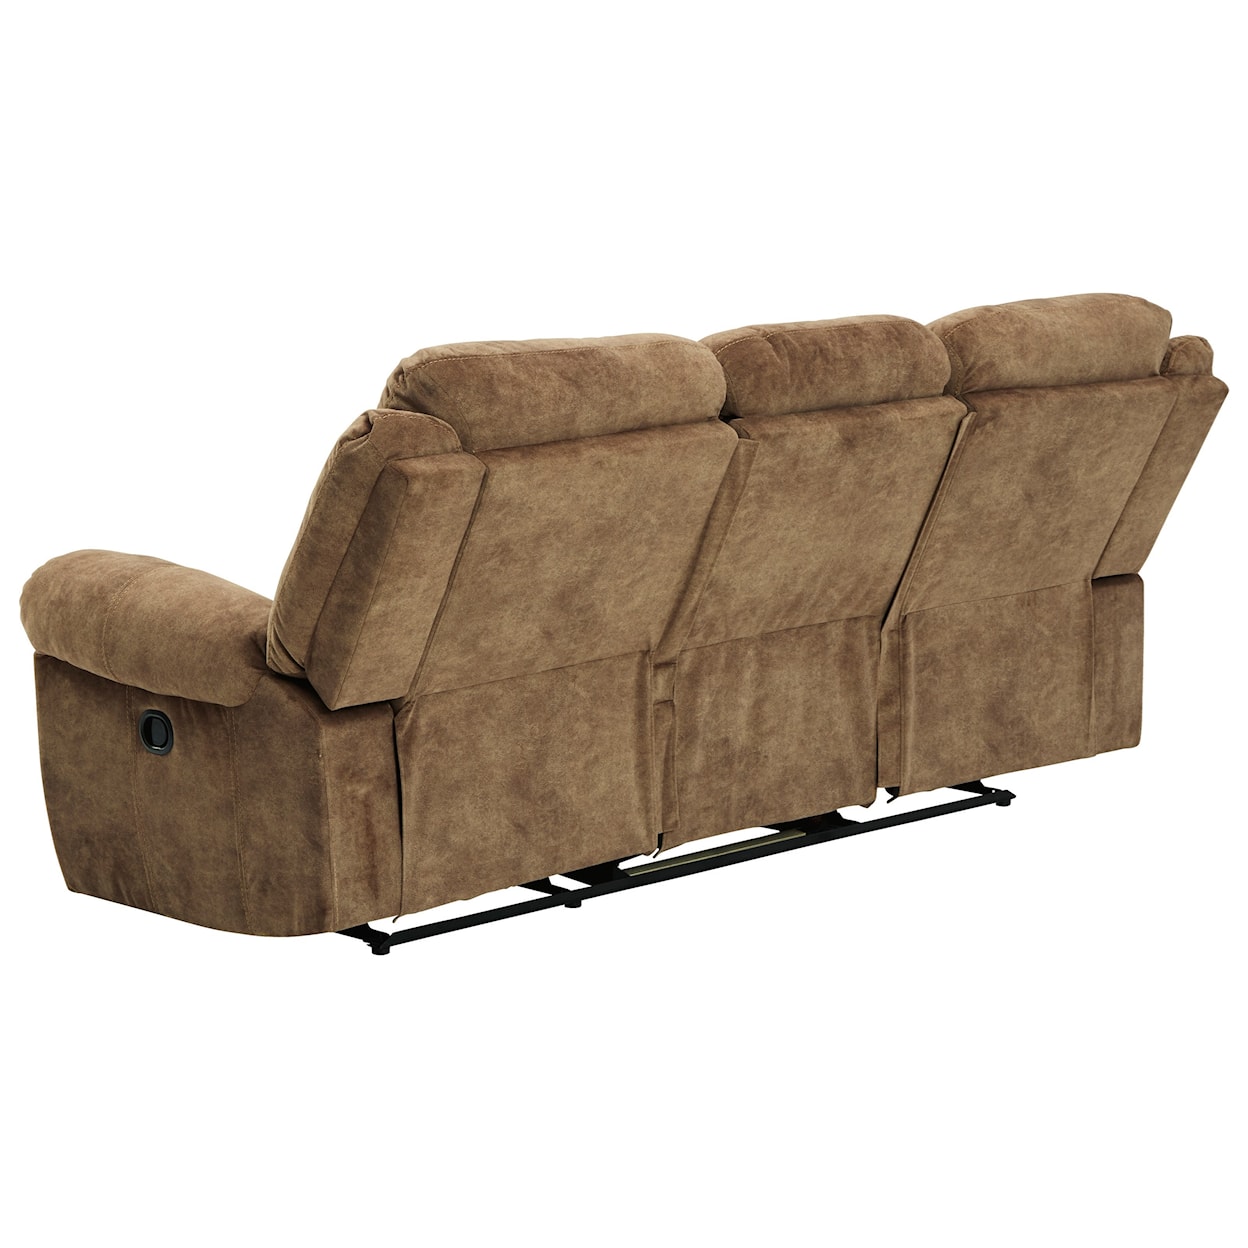 Signature Design by Ashley Furniture Huddle-Up Reclining Sofa w/ Drop Down Table